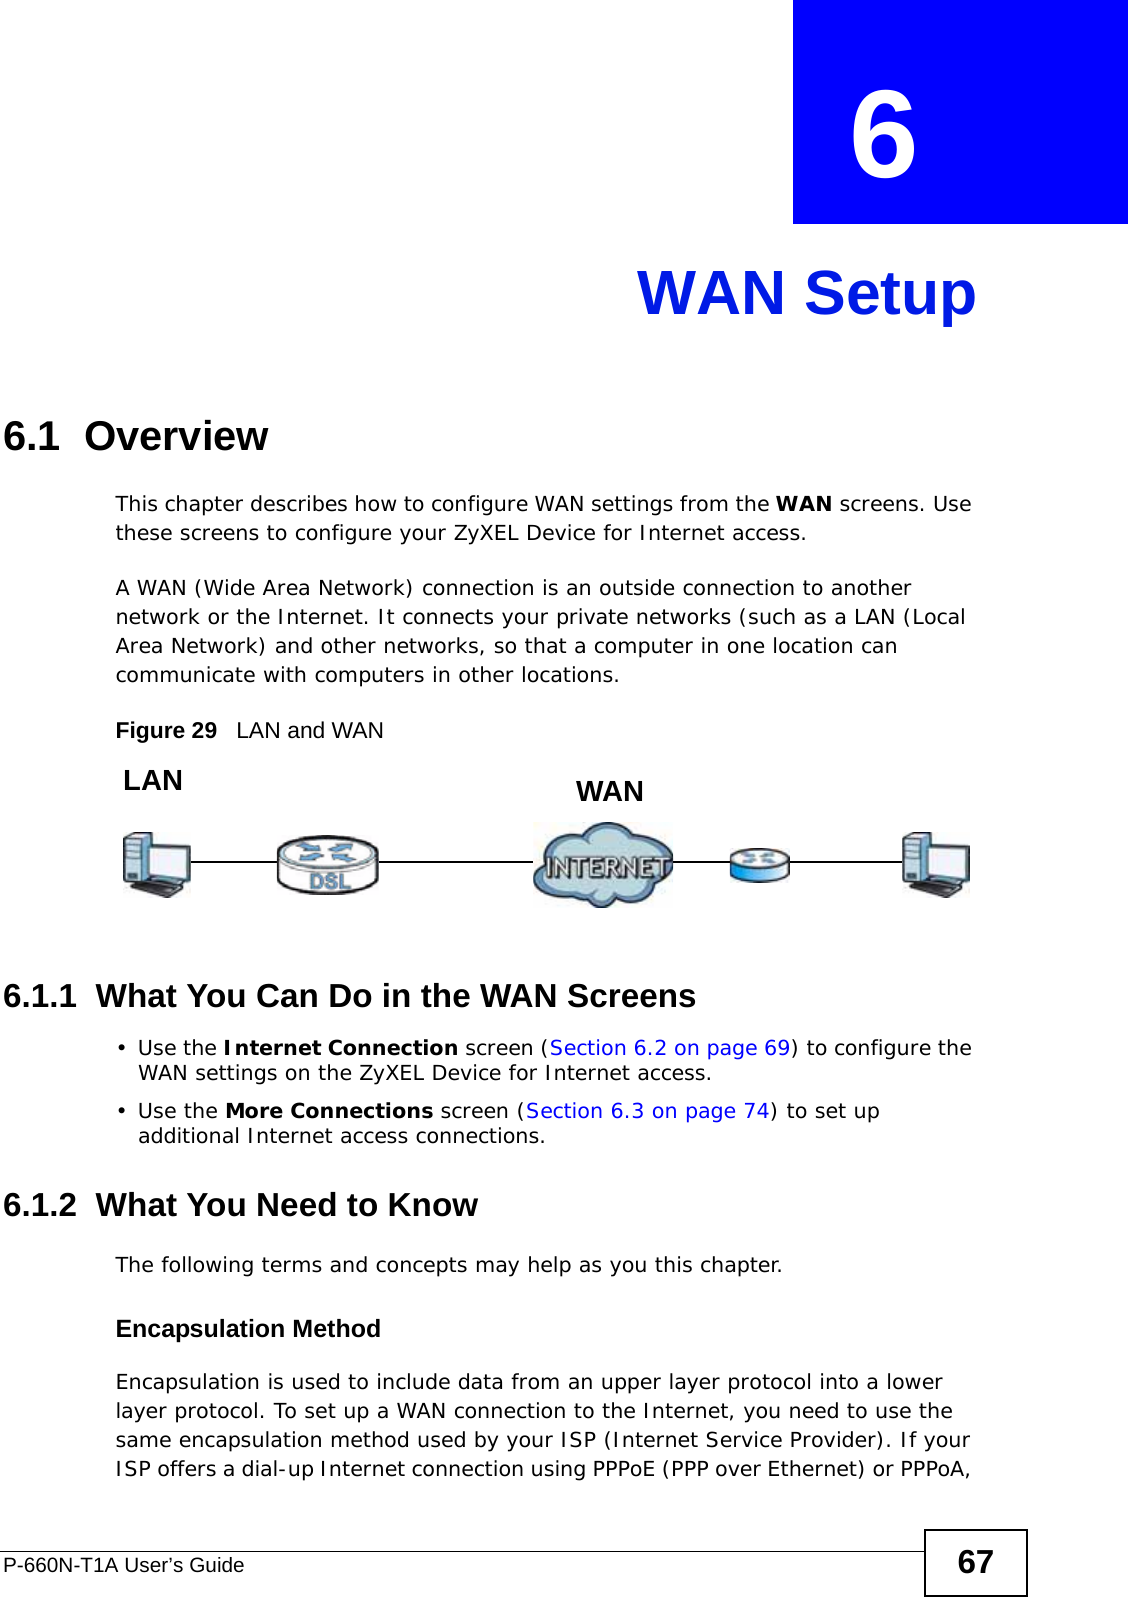 P-660N-T1A User’s Guide 67CHAPTER  6 WAN Setup6.1  OverviewThis chapter describes how to configure WAN settings from the WAN screens. Use these screens to configure your ZyXEL Device for Internet access.A WAN (Wide Area Network) connection is an outside connection to another network or the Internet. It connects your private networks (such as a LAN (Local Area Network) and other networks, so that a computer in one location can communicate with computers in other locations.Figure 29   LAN and WAN6.1.1  What You Can Do in the WAN Screens•Use the Internet Connection screen (Section 6.2 on page 69) to configure the WAN settings on the ZyXEL Device for Internet access.•Use the More Connections screen (Section 6.3 on page 74) to set up additional Internet access connections.6.1.2  What You Need to KnowThe following terms and concepts may help as you this chapter.Encapsulation MethodEncapsulation is used to include data from an upper layer protocol into a lower layer protocol. To set up a WAN connection to the Internet, you need to use the same encapsulation method used by your ISP (Internet Service Provider). If your ISP offers a dial-up Internet connection using PPPoE (PPP over Ethernet) or PPPoA, WANLAN